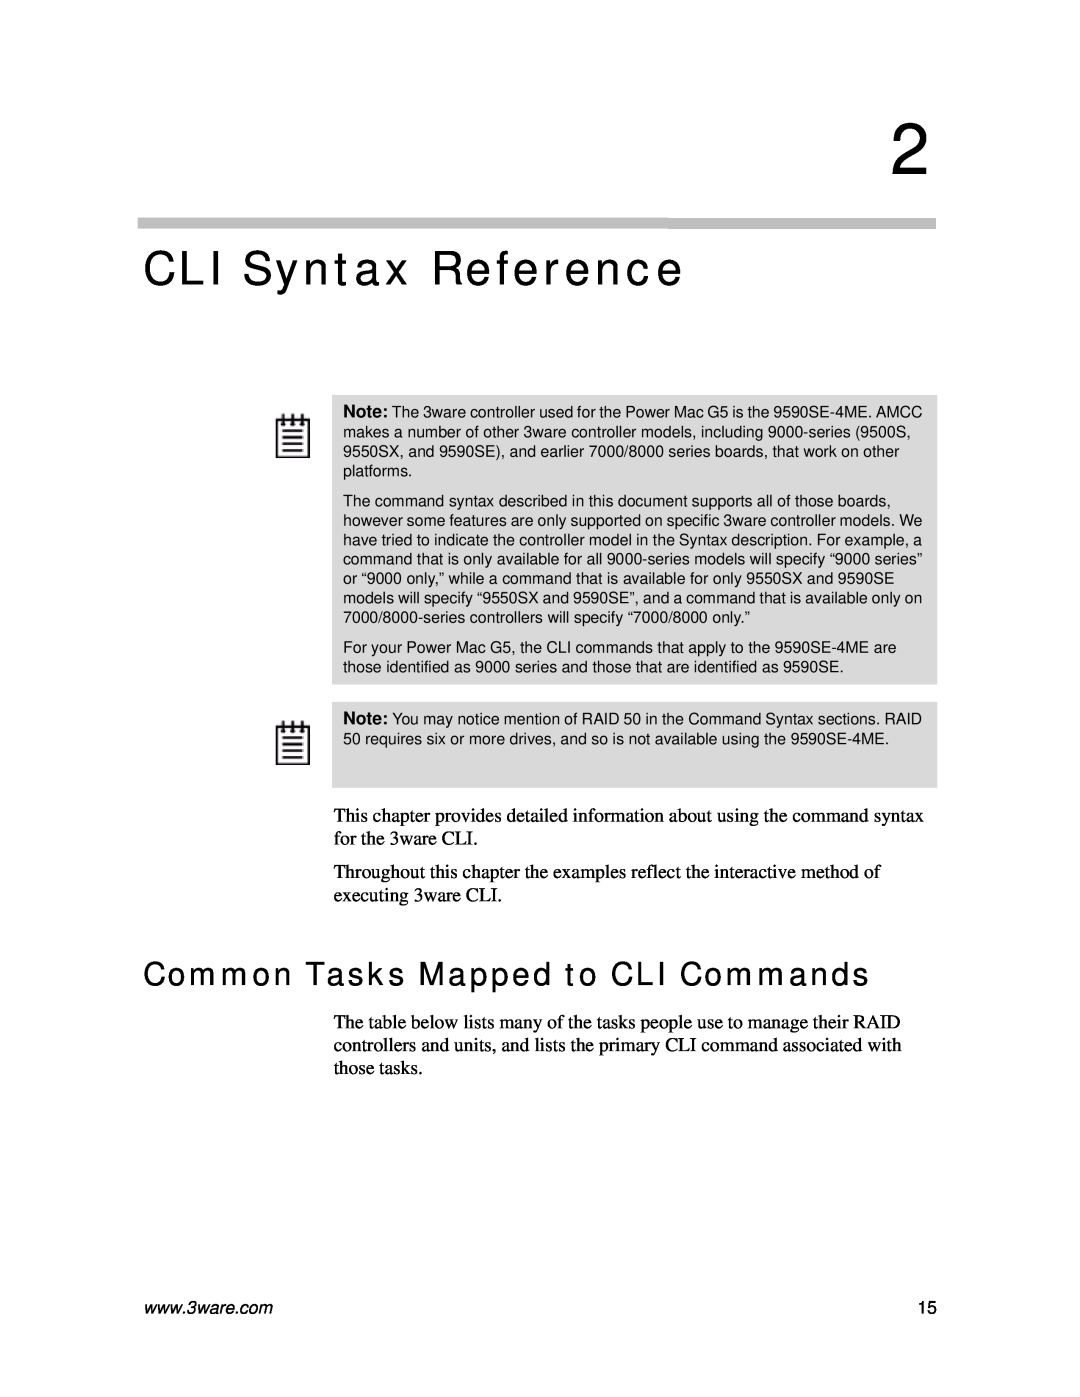 AMCC 9590SE-4ME manual CLI Syntax Reference, Common Tasks Mapped to CLI Commands 